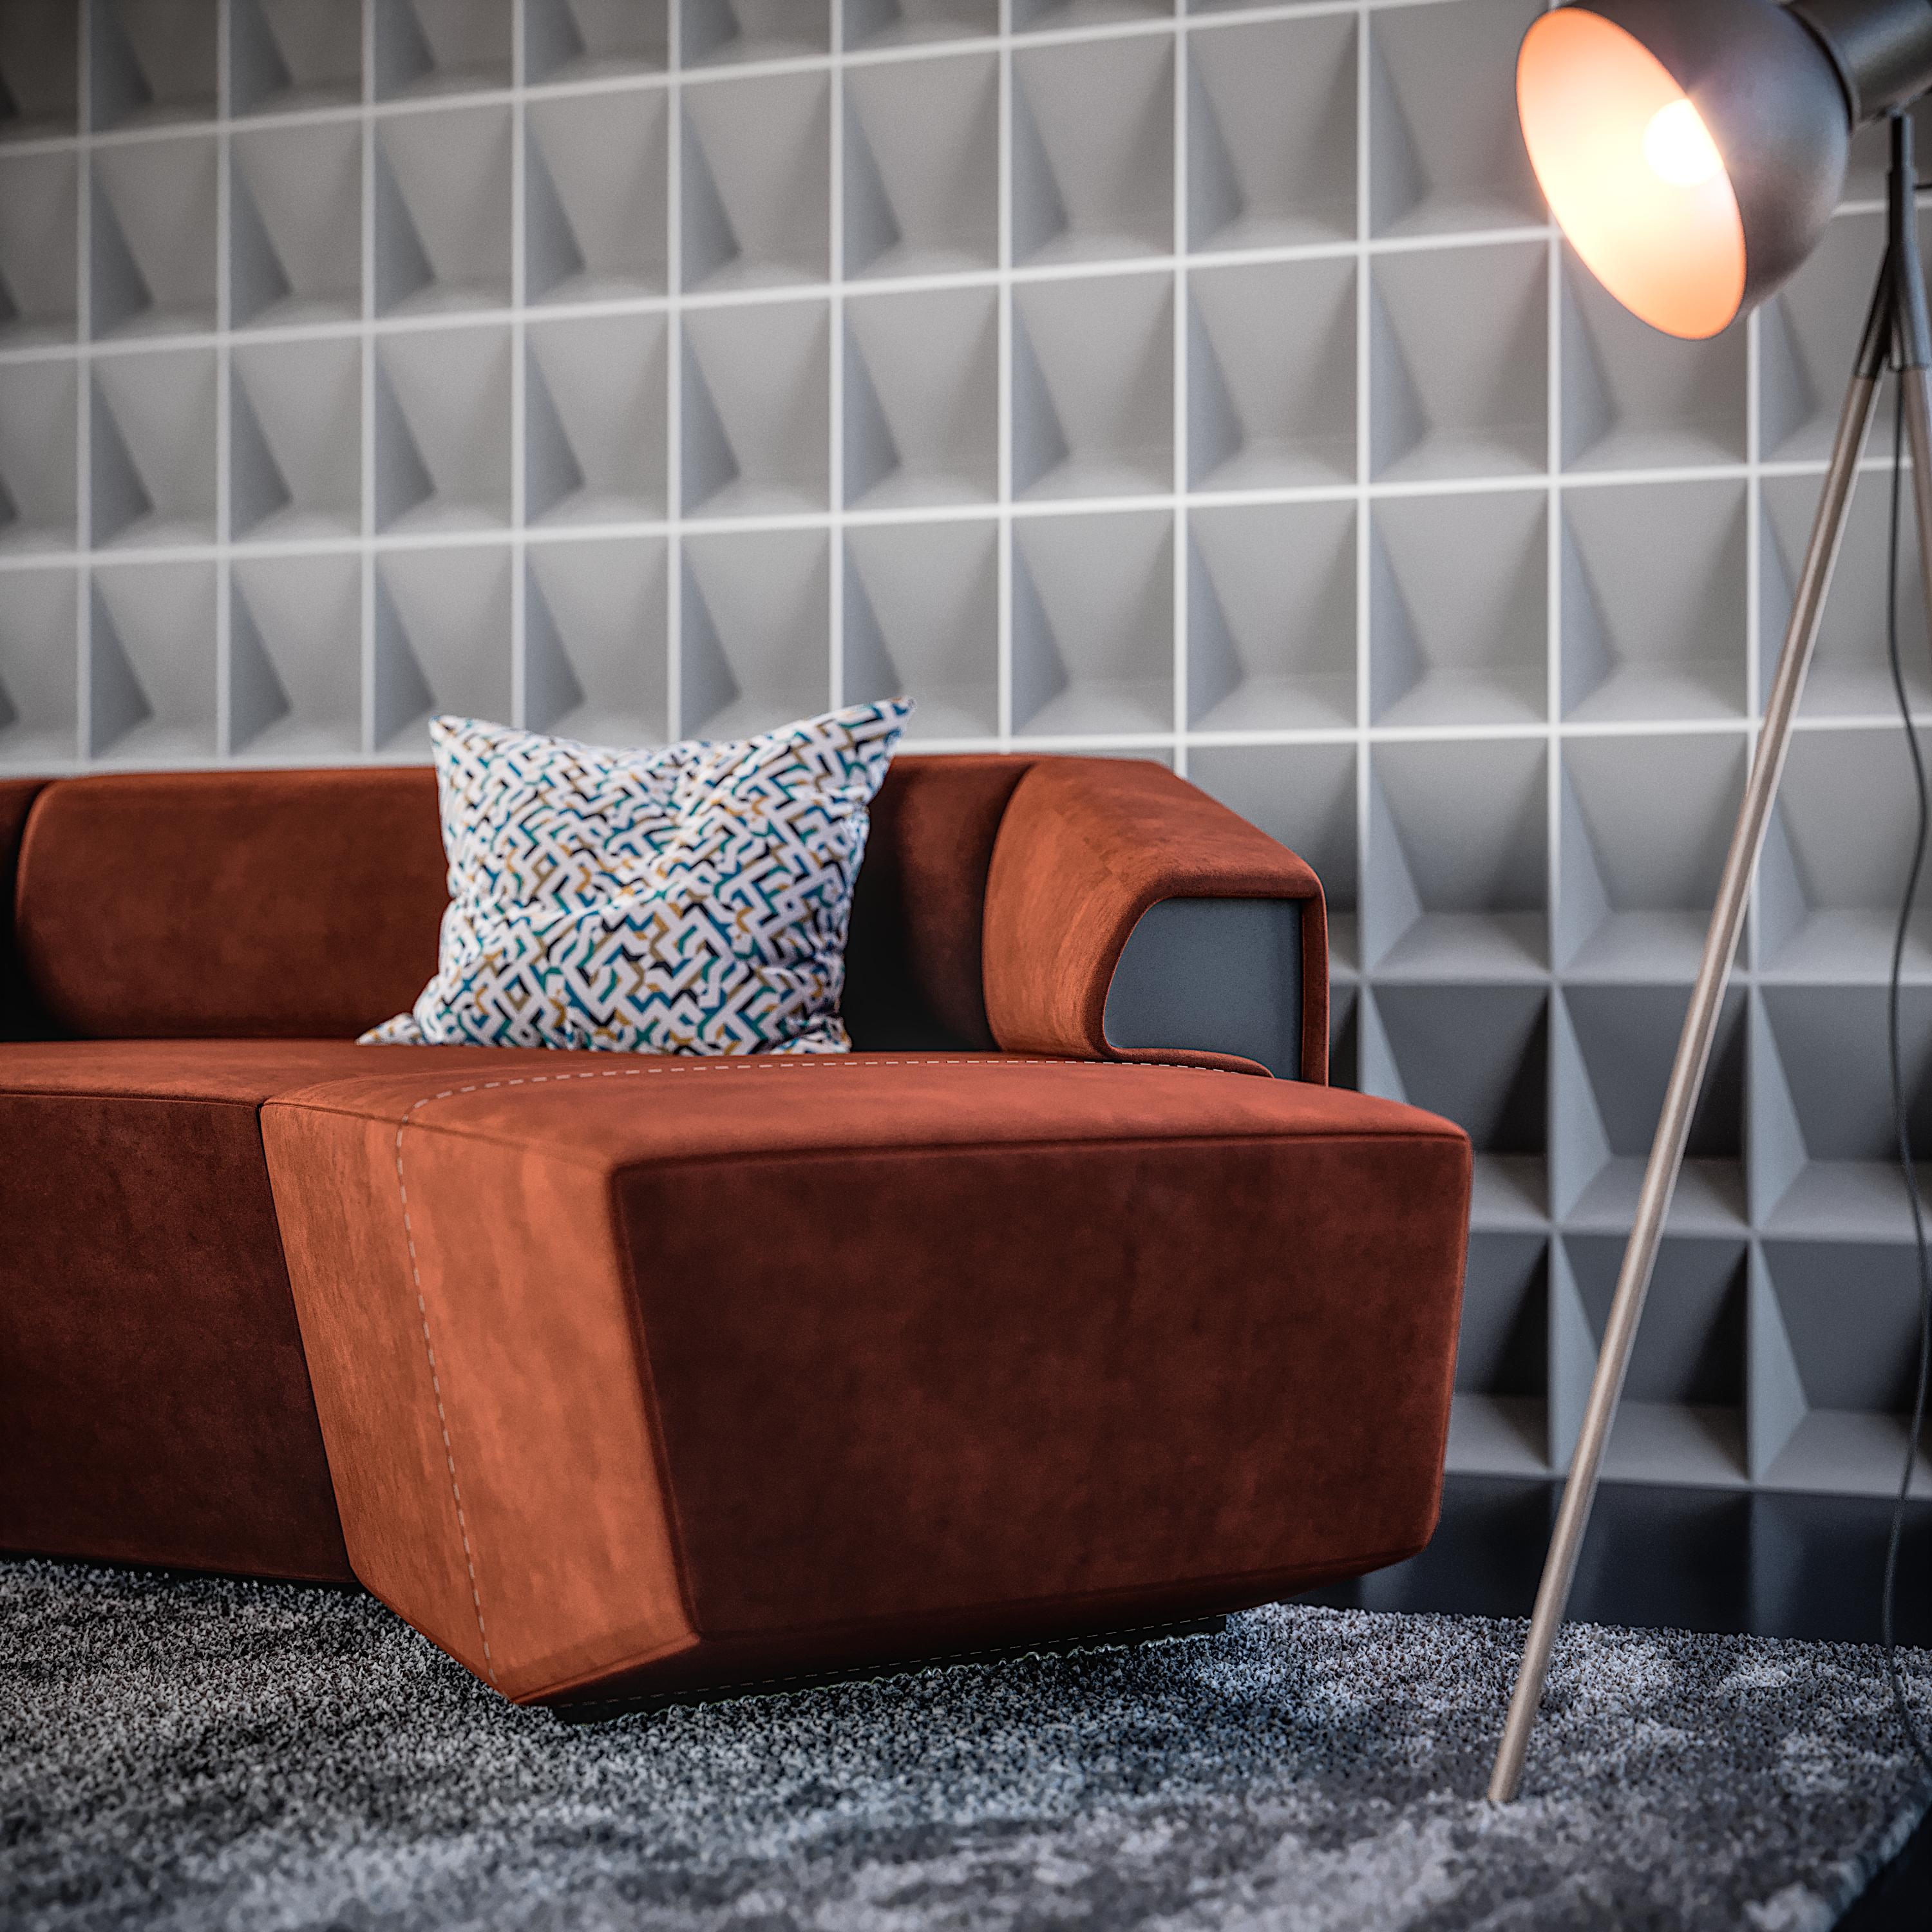 Dubhè pouf element is an element of modular sofa available in many colors and materials. Its structure is in wood padded with multi-density rubber.
The base has titanium nickel finishing.

Dubhè is part of the 